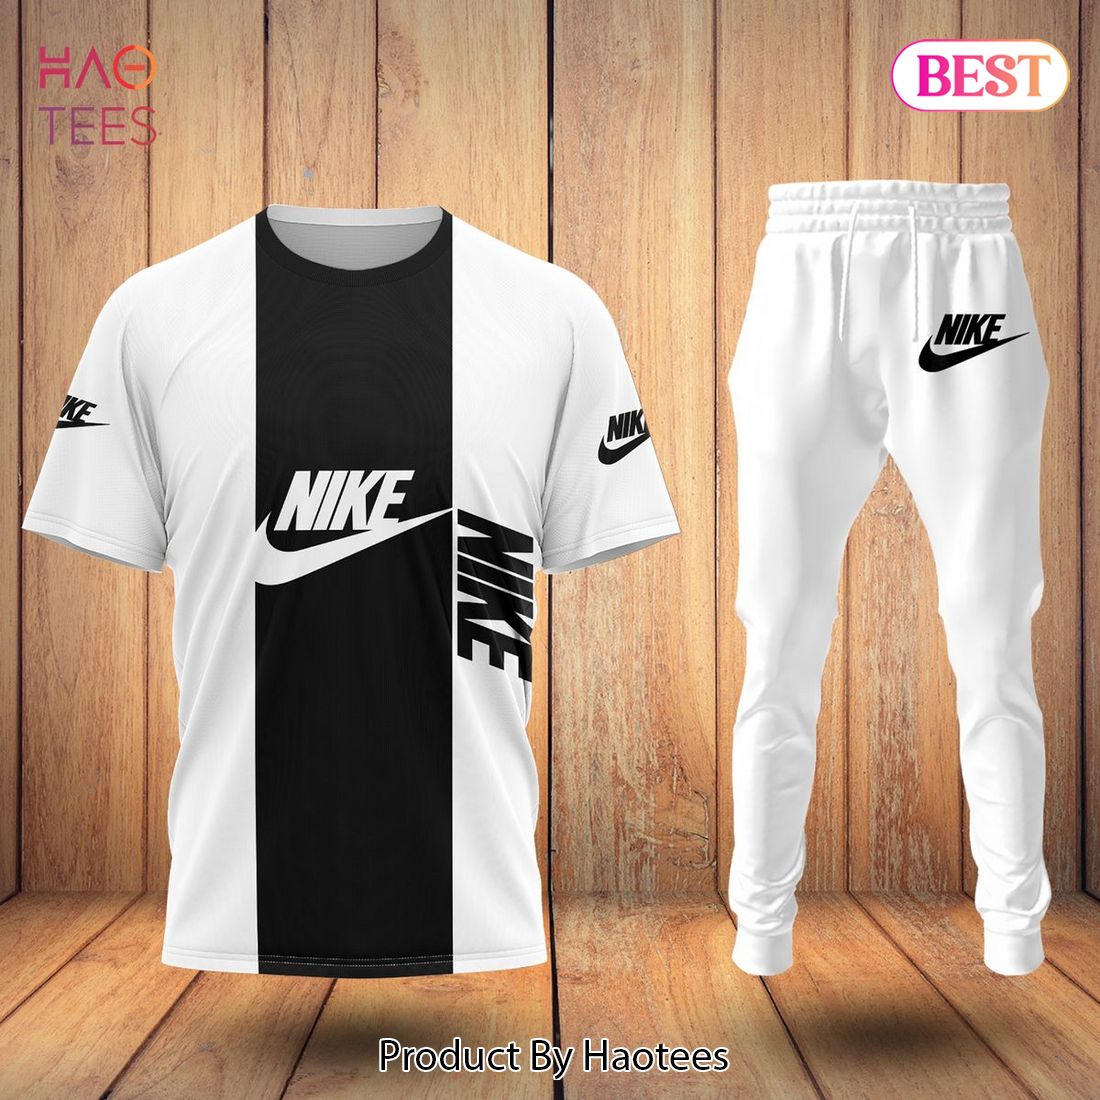 THE BEST Nike Basic Color Black Mix White Luxury Brand T-Shirt And Pants All Over Printed